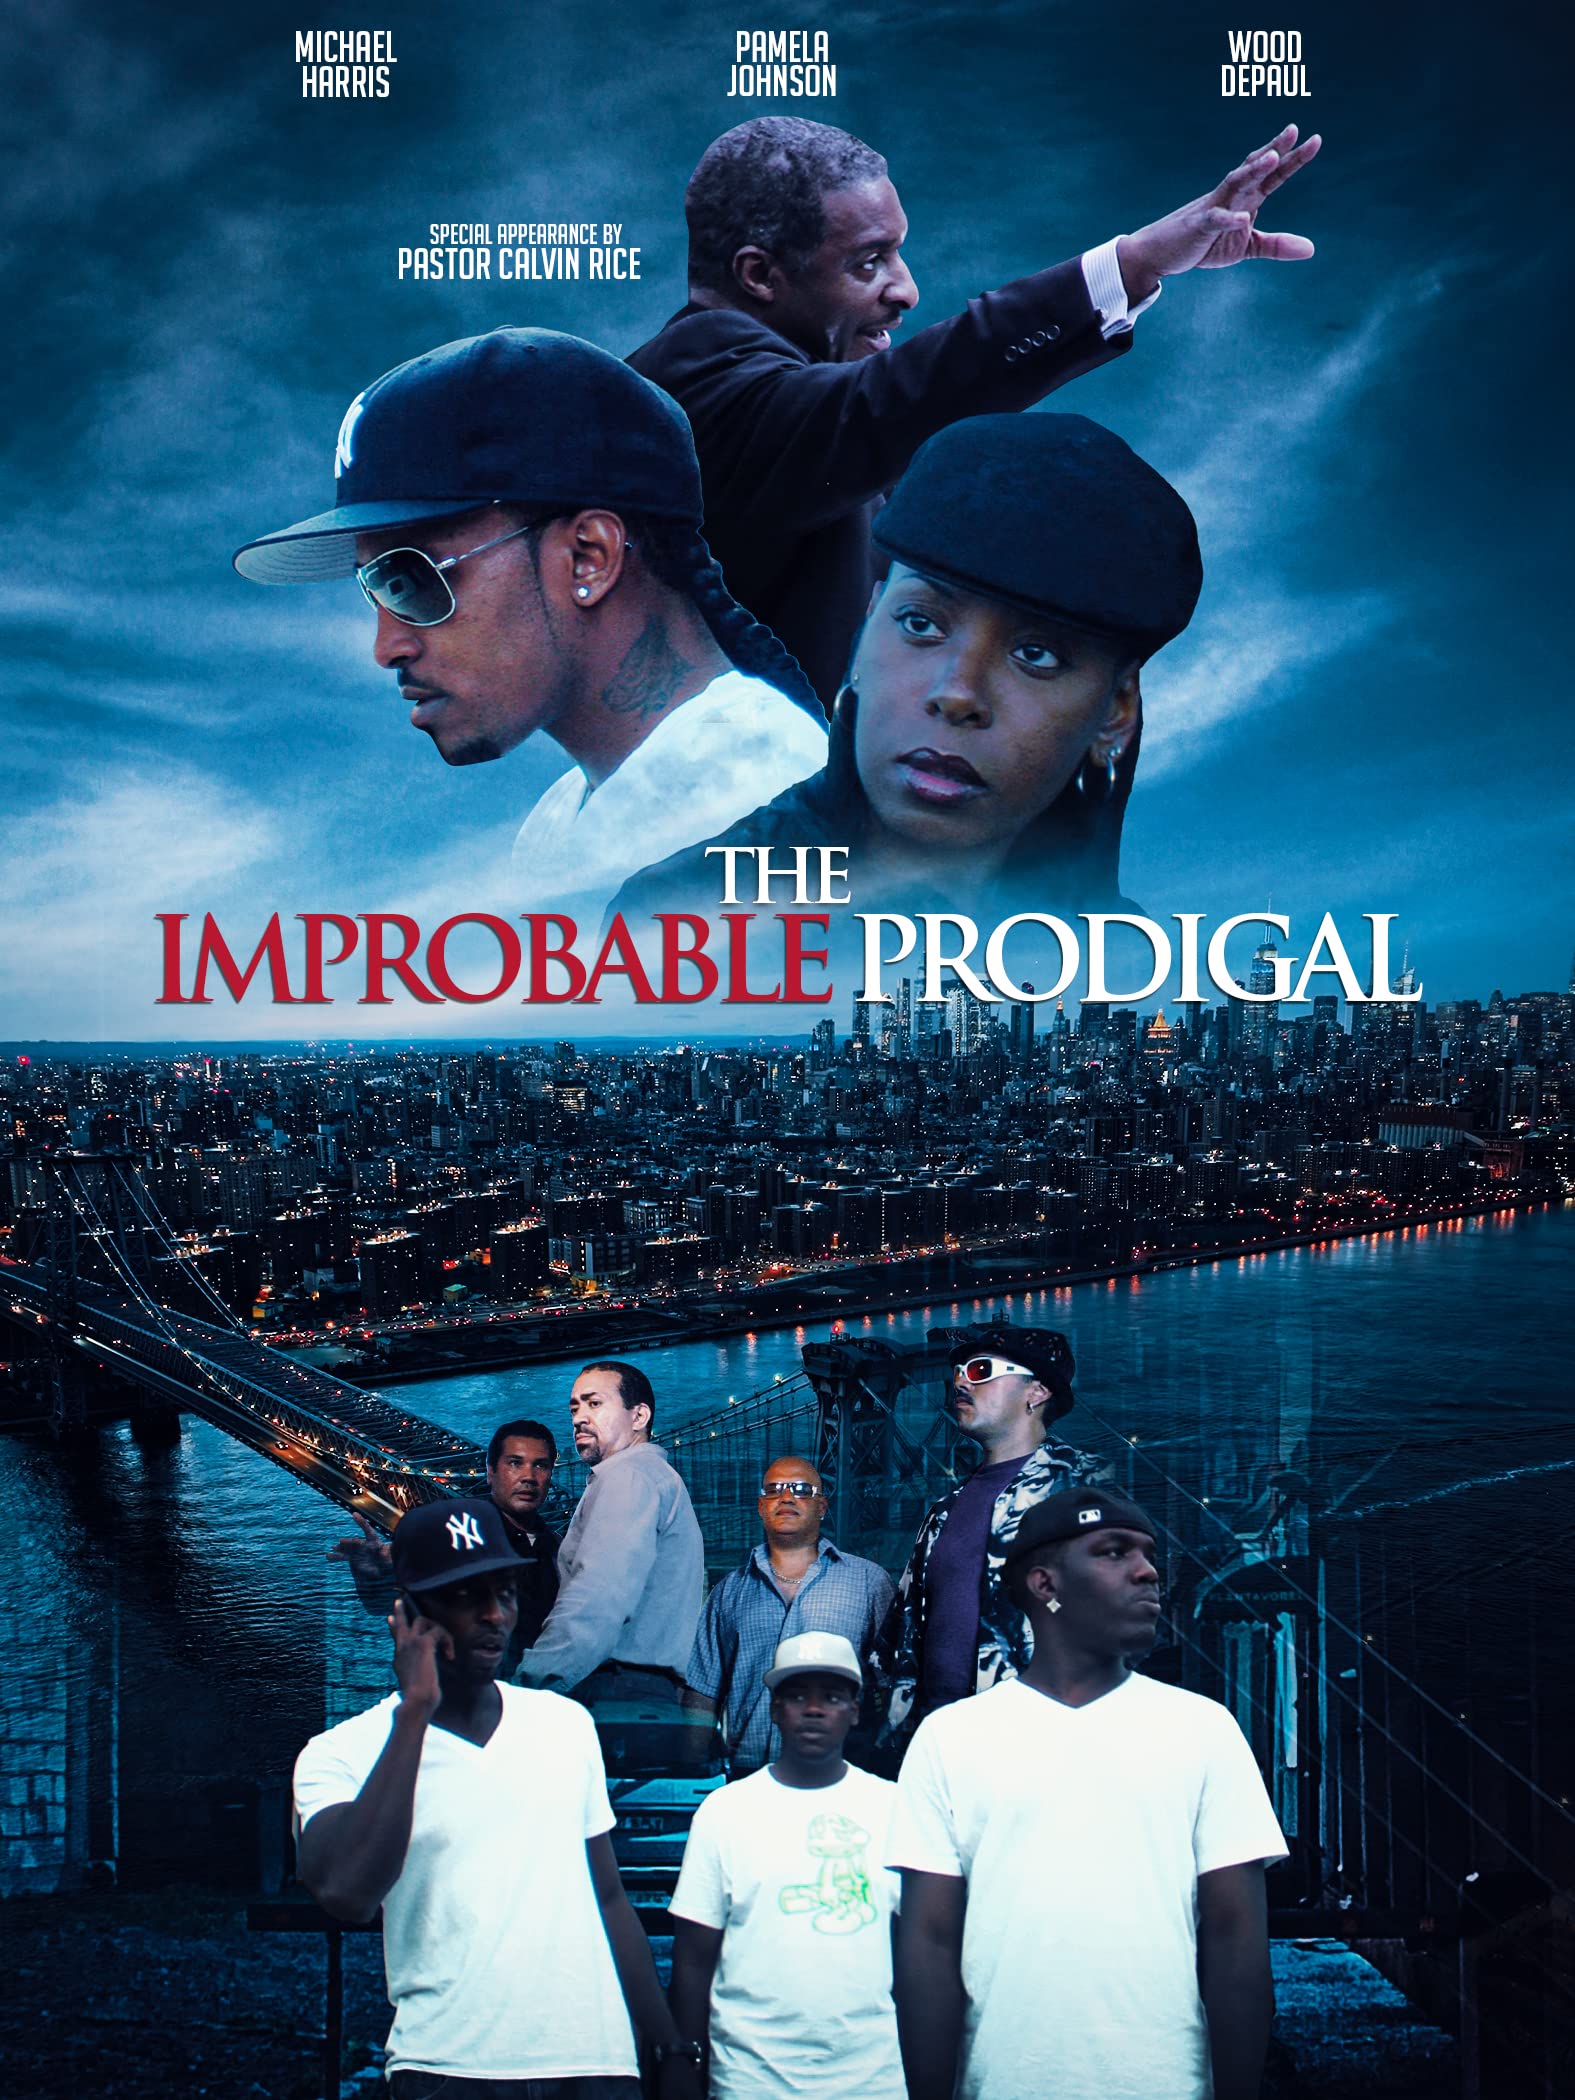 The Improbable Prodigal